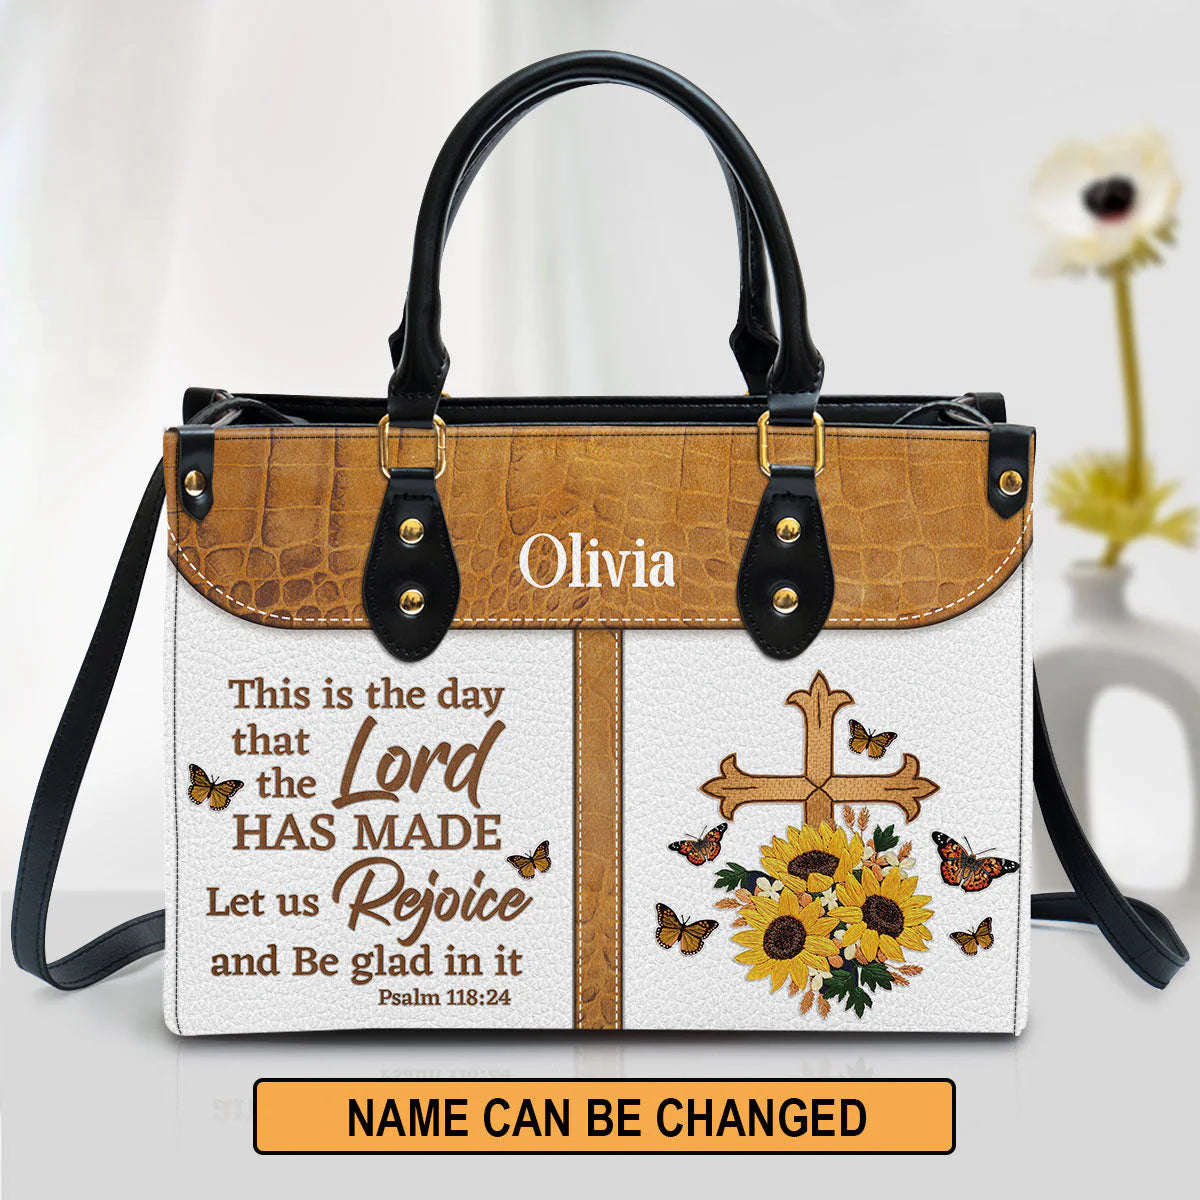 Christianartbag Handbag, This Is The Day That The Lord Has Made, Personalized Gifts, Gifts for Women, Christmas Gift. - Christian Art Bag